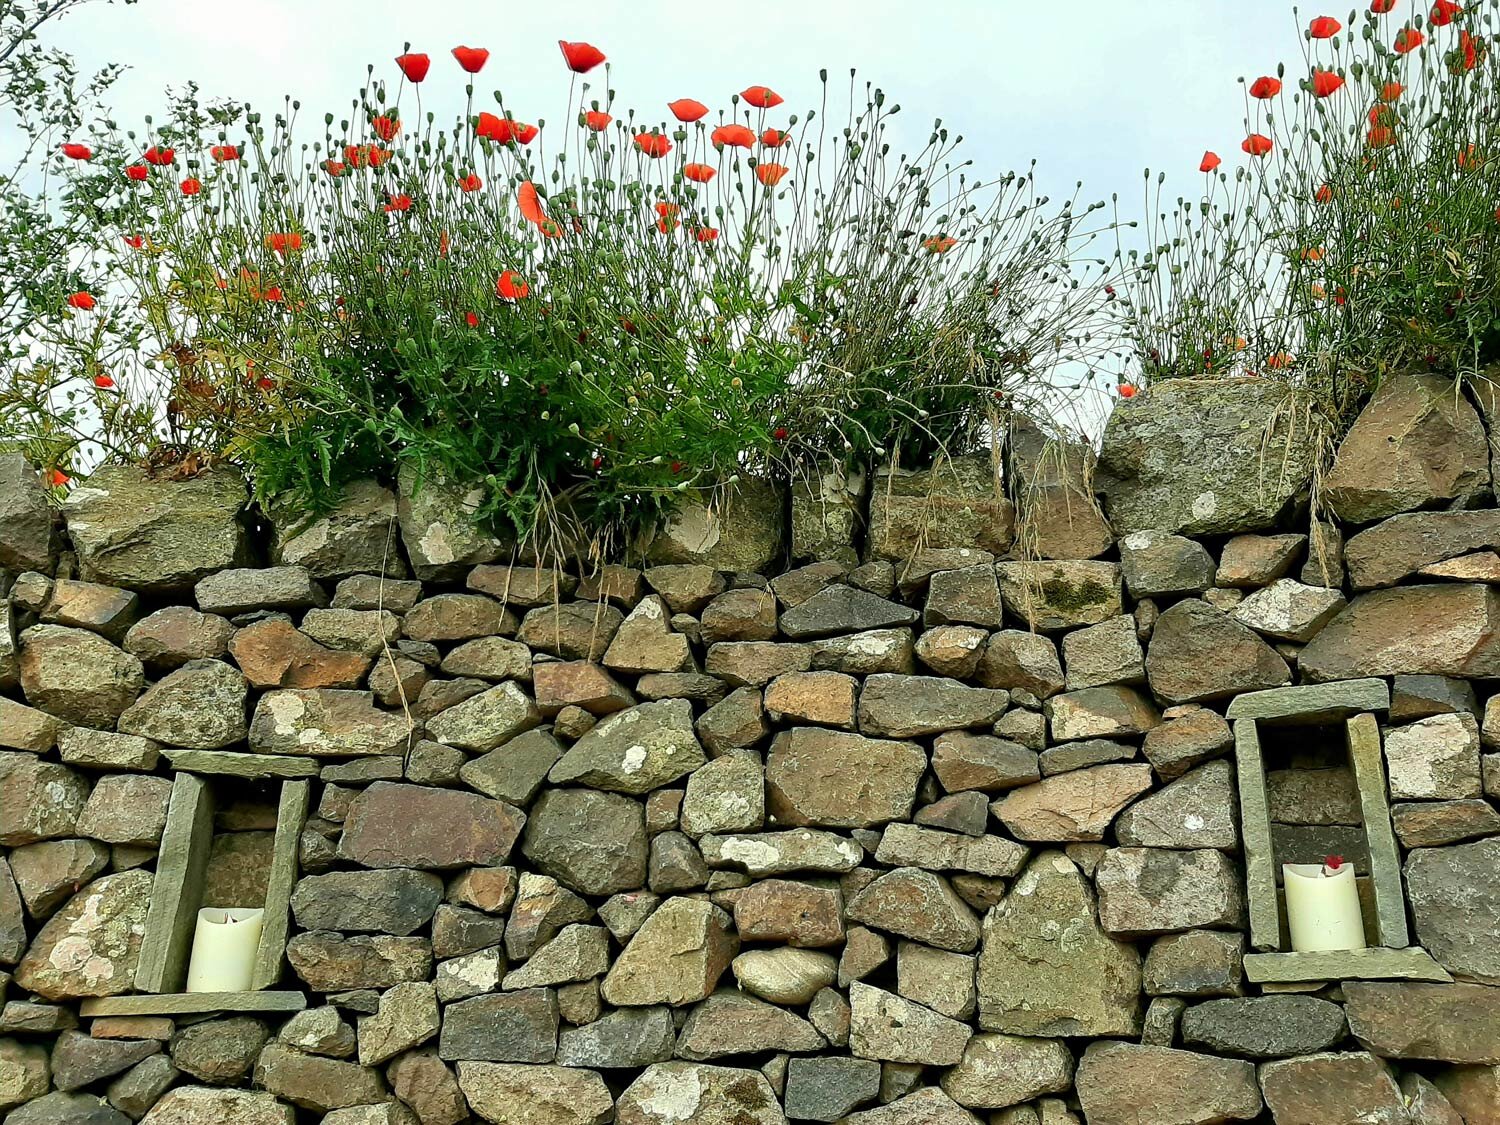 Drystone Wall and Poppies  - Garden Design and Landscaping in Perthshire